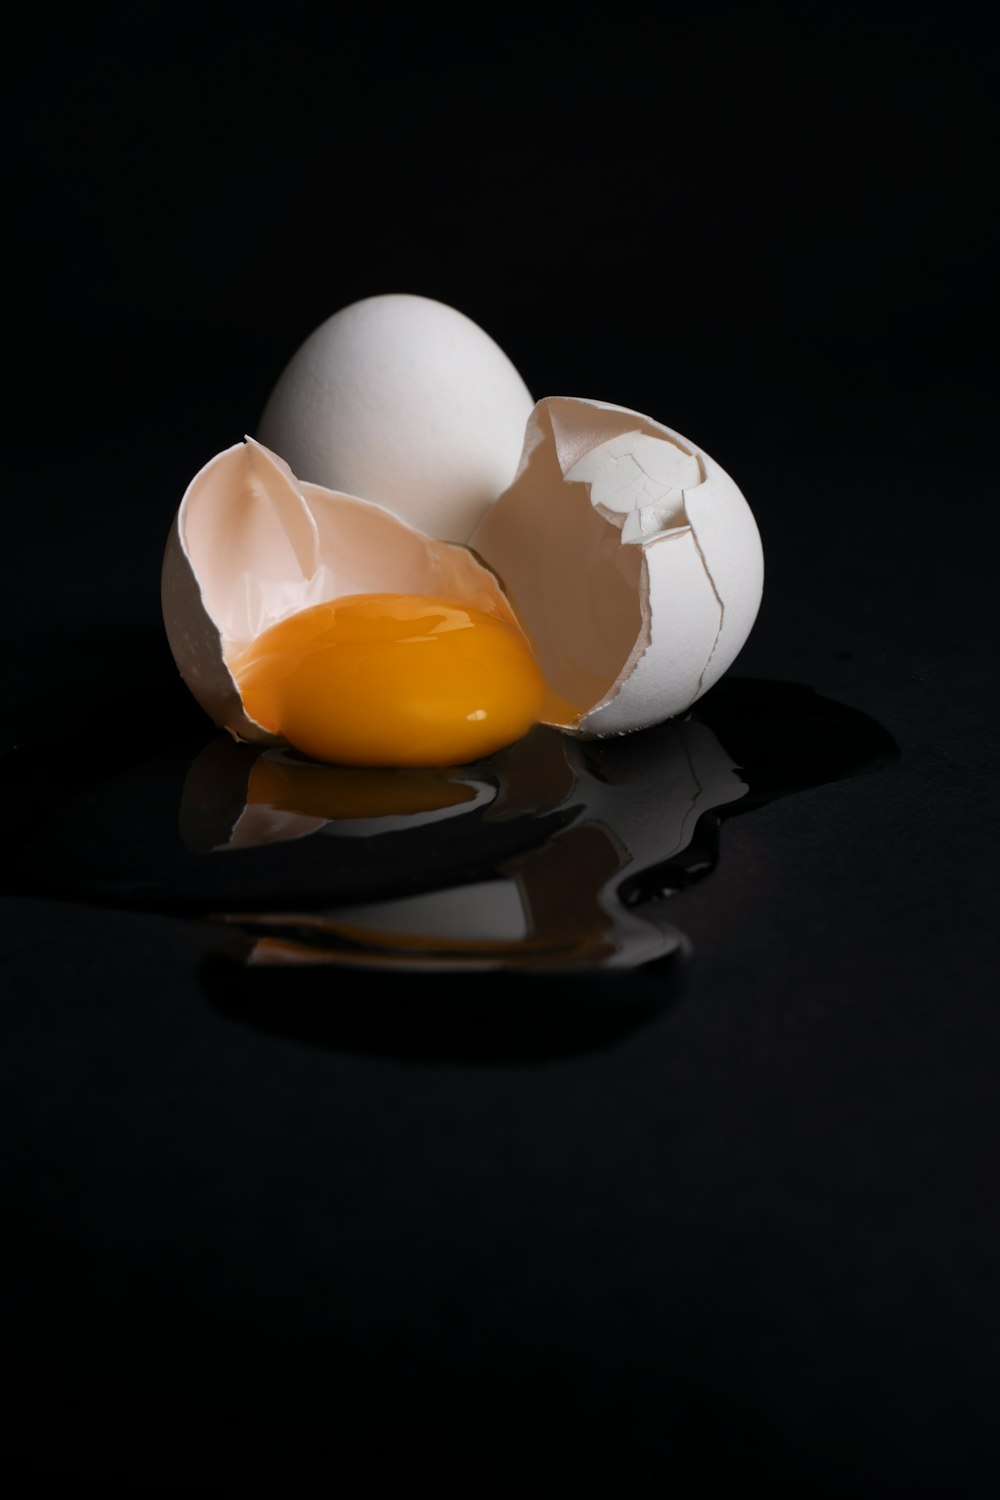 white egg on brown wooden tray